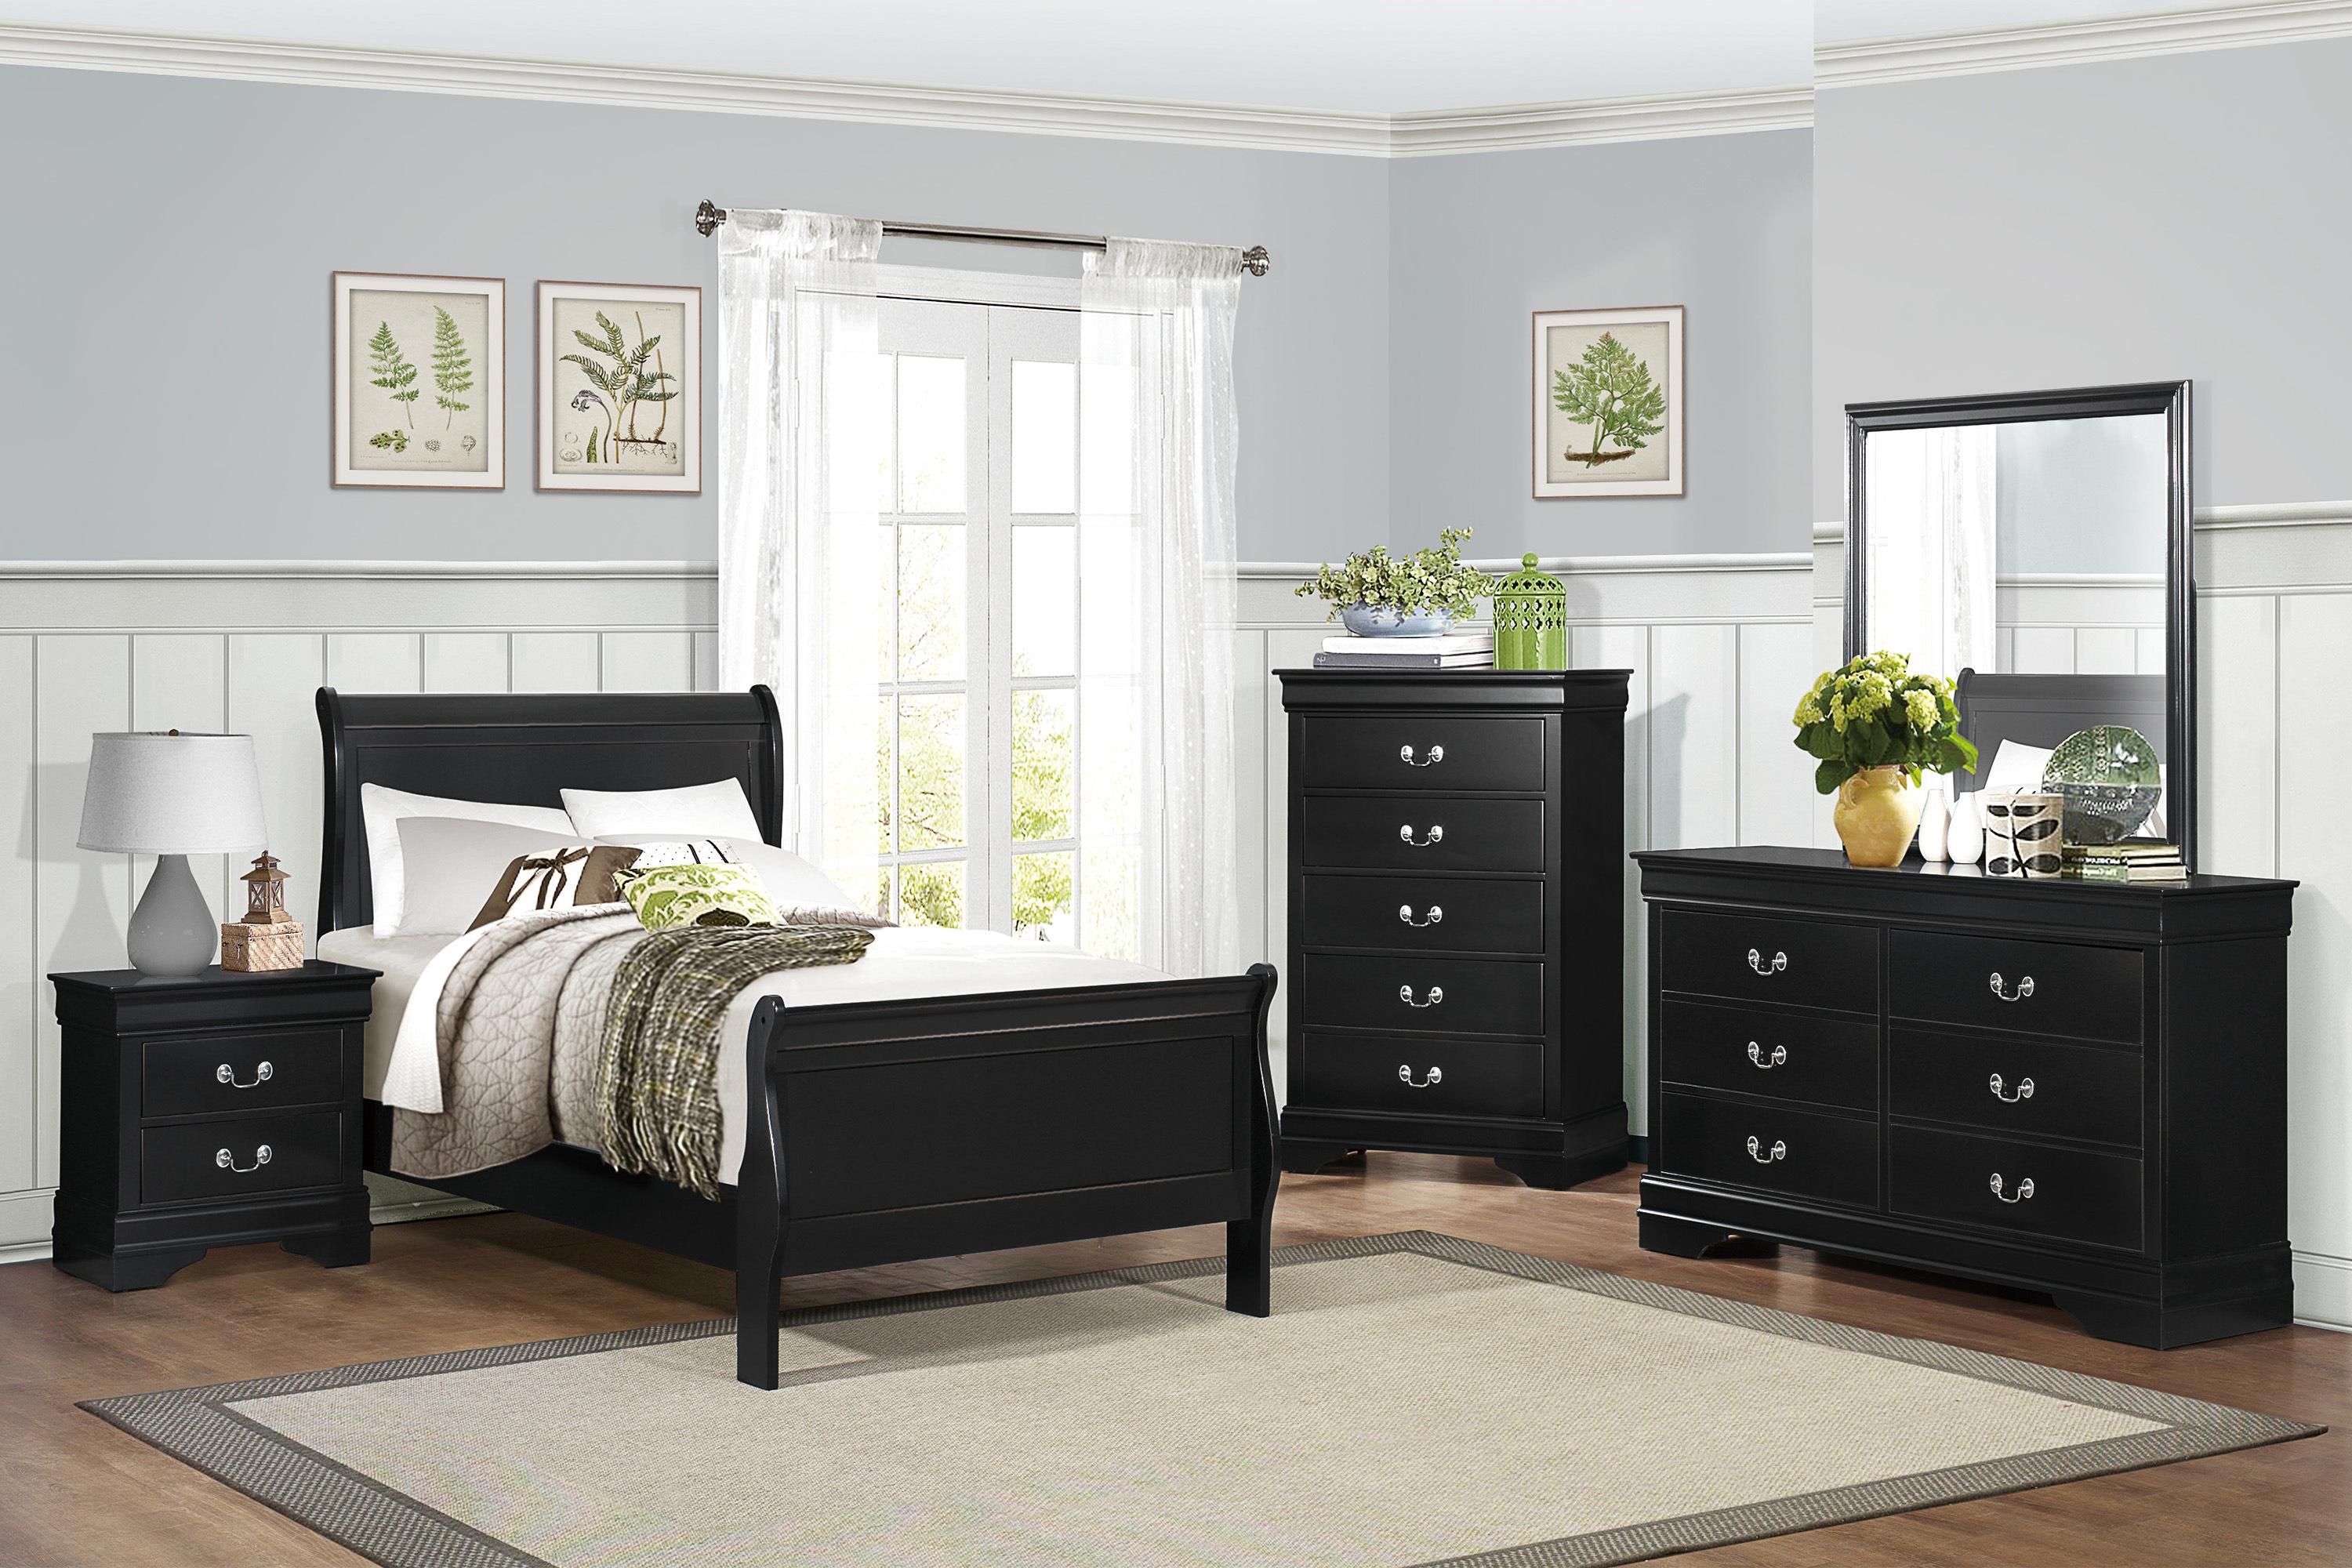 Traditional Bedroom Set 2147TBK-1-5PC Mayville 2147TBK-1-5PC in Black 